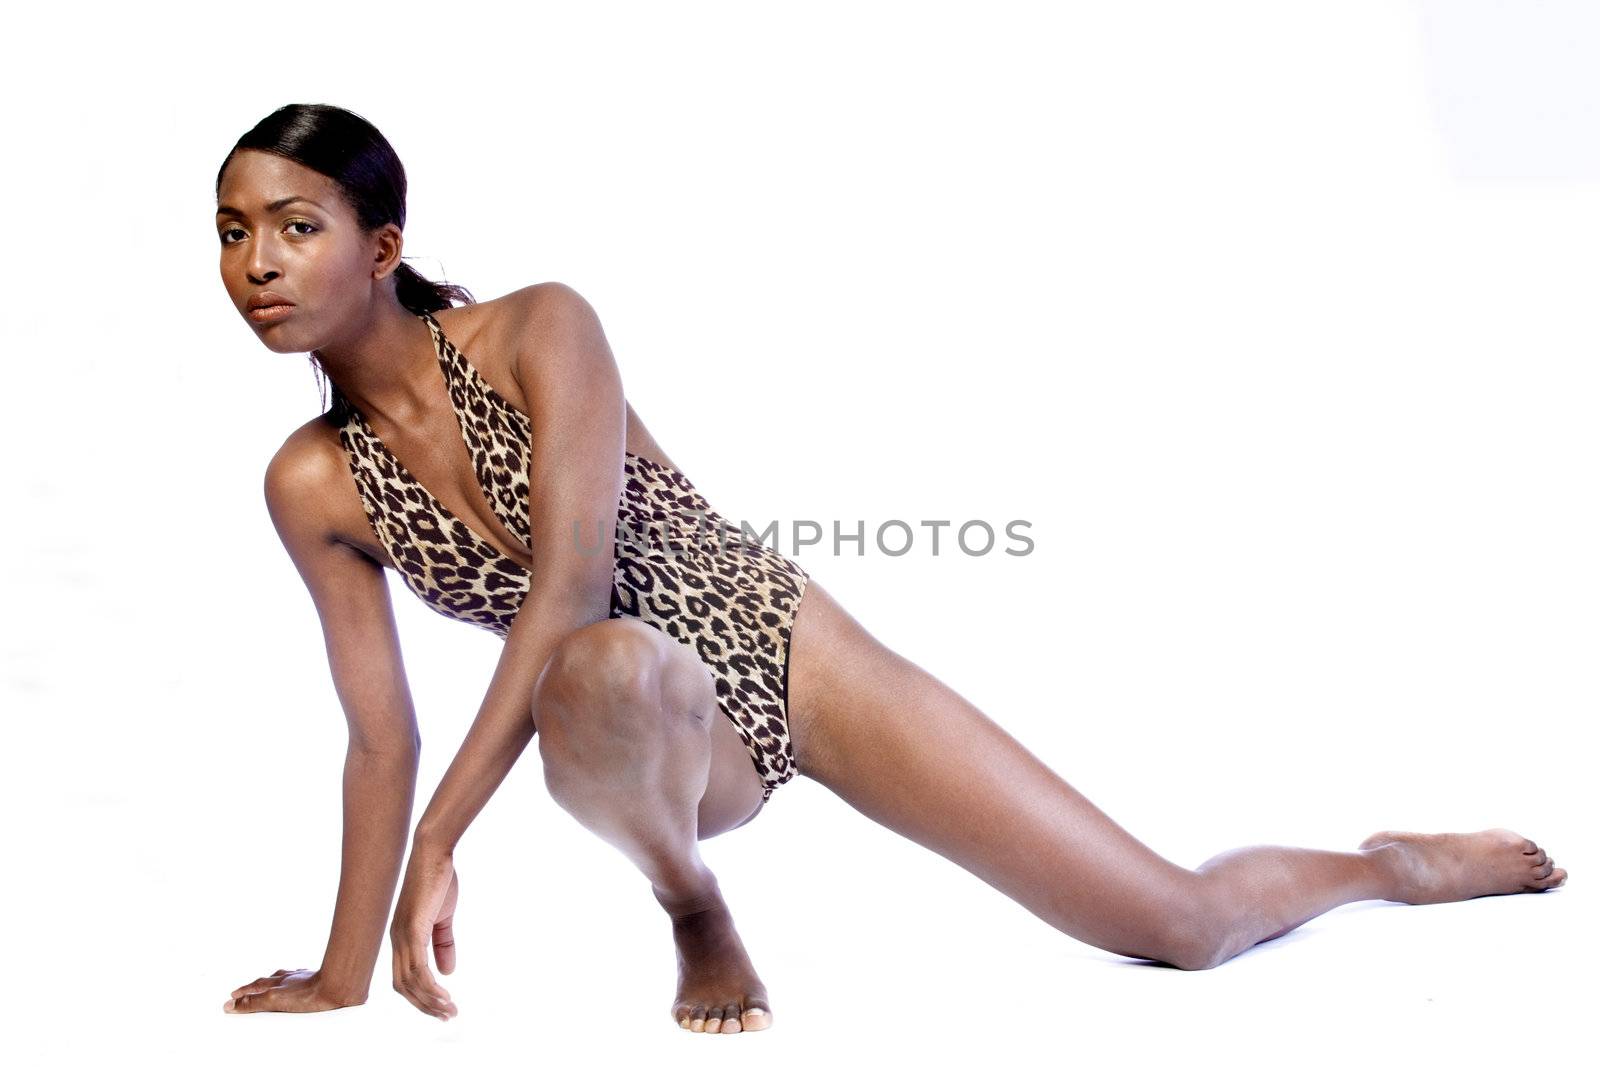 A beauty portrait taken from an african model in the studio stretchin in her bathing suit